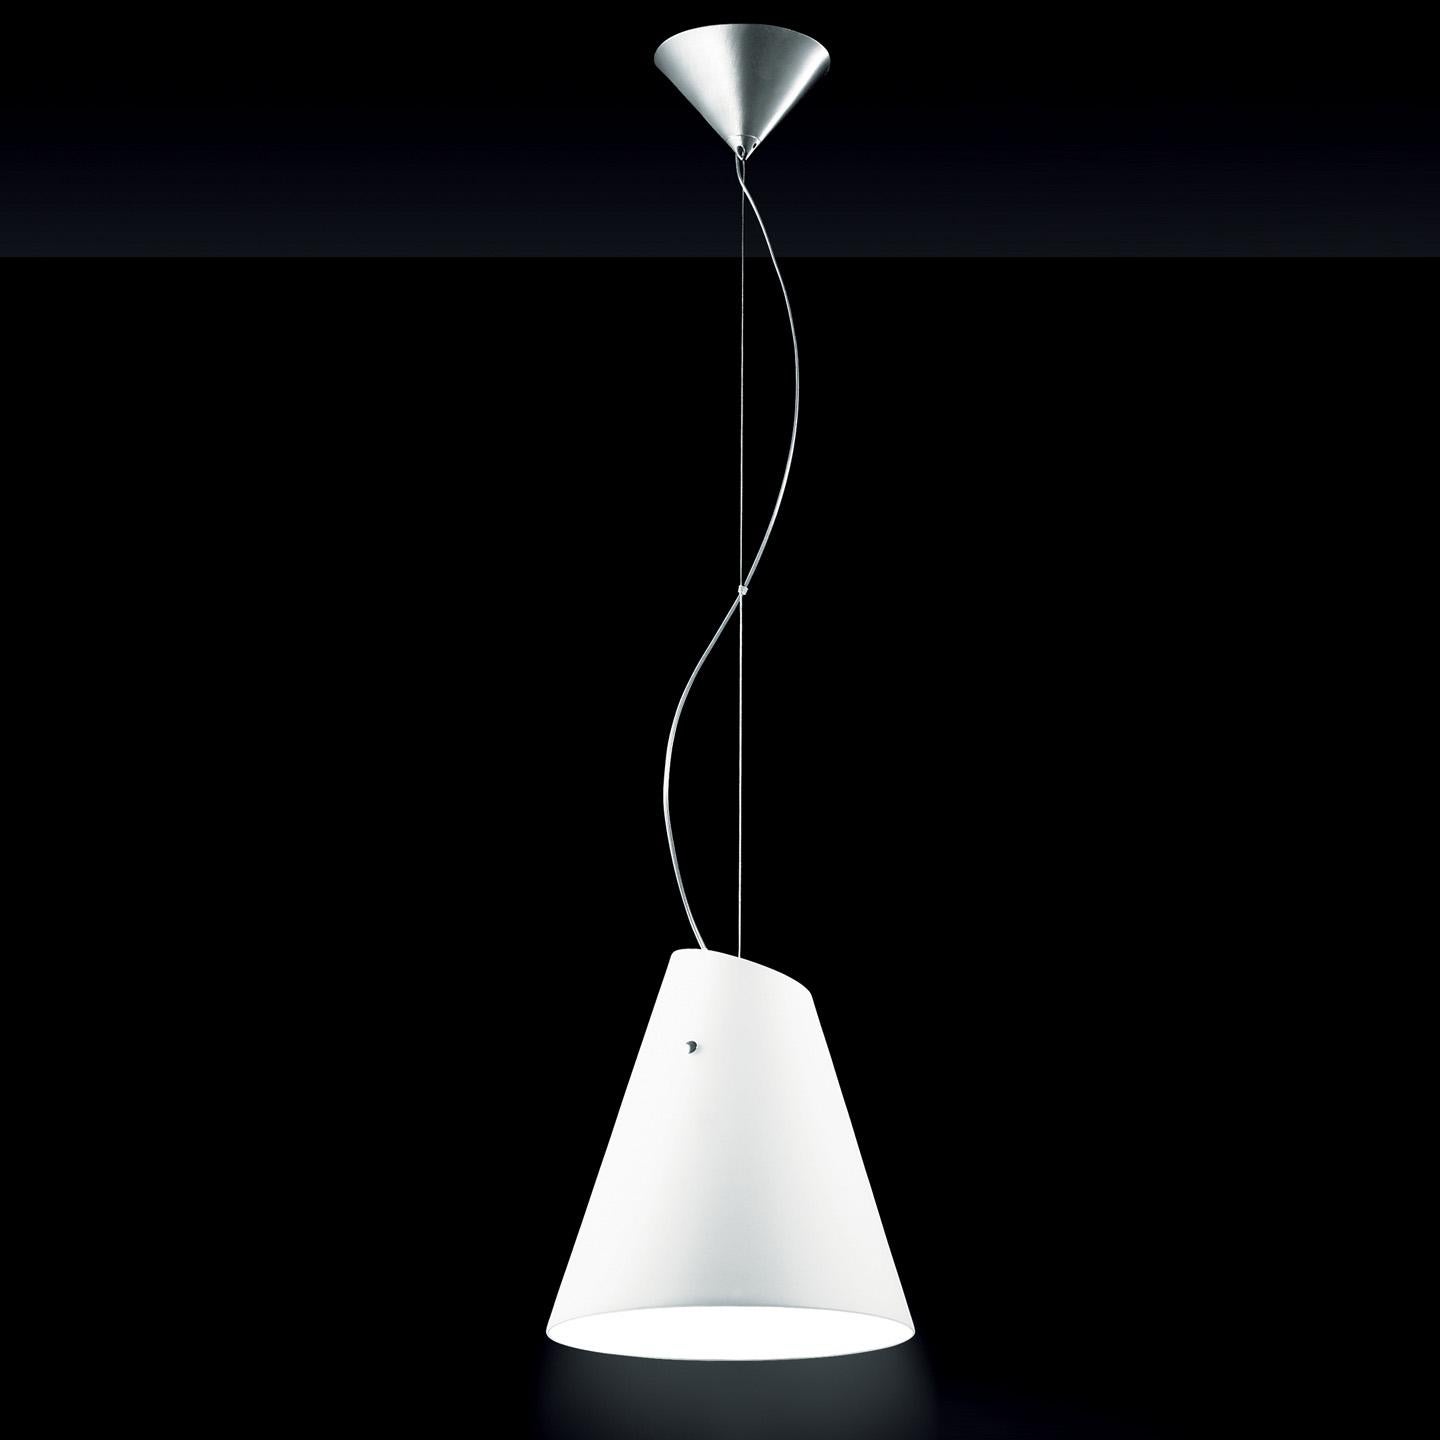 The Micene pendant has been an icon of the Leucos collection since its design debut in 1991. It was designed by Toso, Massari & Associates to push the limits of what a lampshade could be. The shade plays with scale and is handmade with a traditional